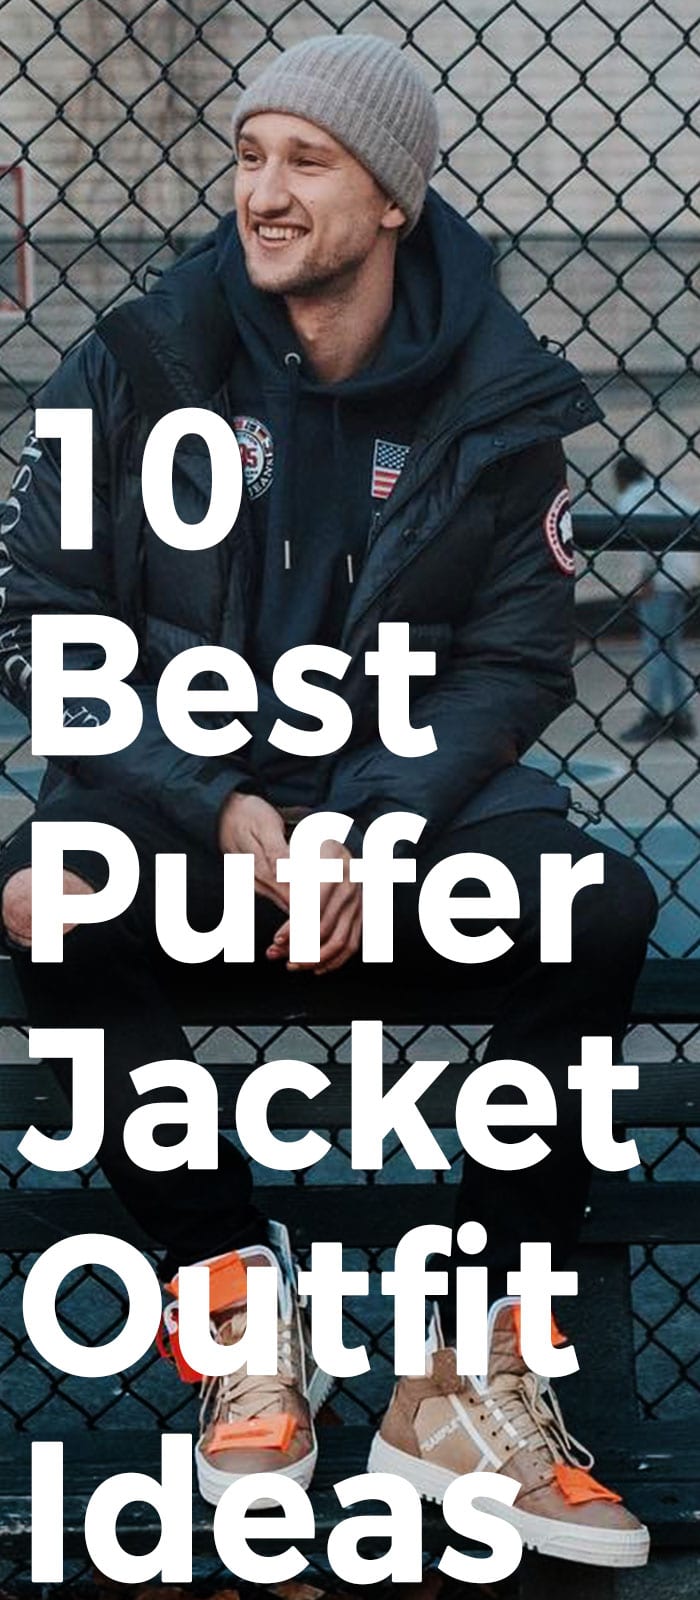 10 Best Puffer Jacket Outfit Ideas!